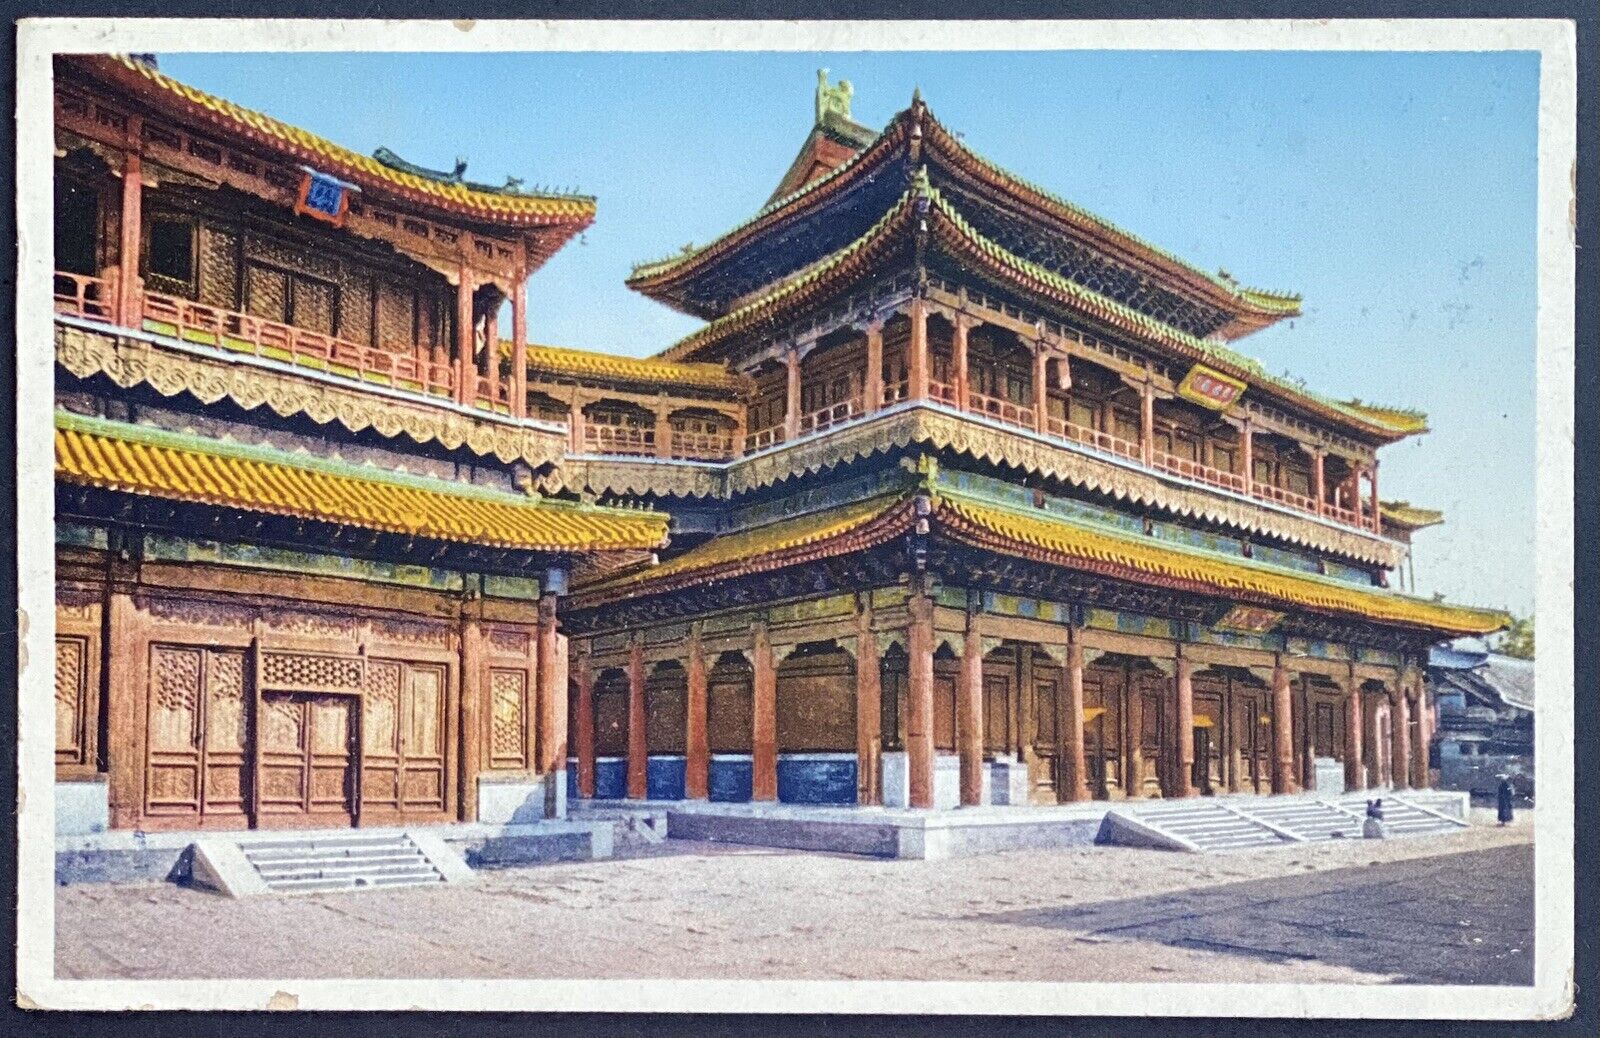  Lama Temple Peking, RPPC Color,  Posted, Message Dated 1922